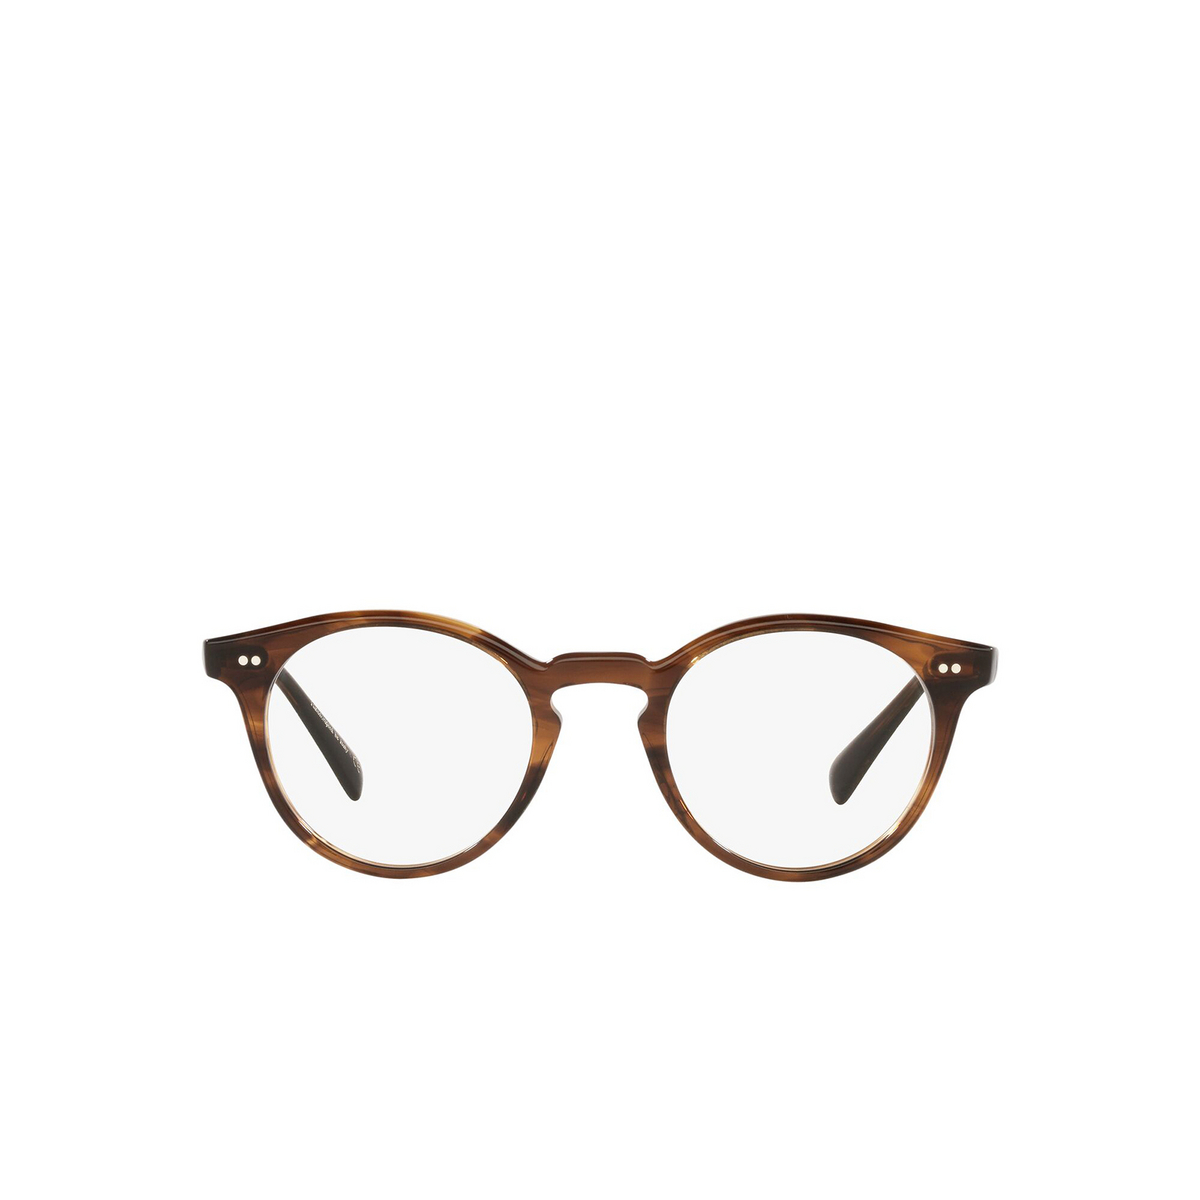 Oliver Peoples® Round Eyeglasses: Romare OV5459U color Tuscany Tortoise 1724 - front view.